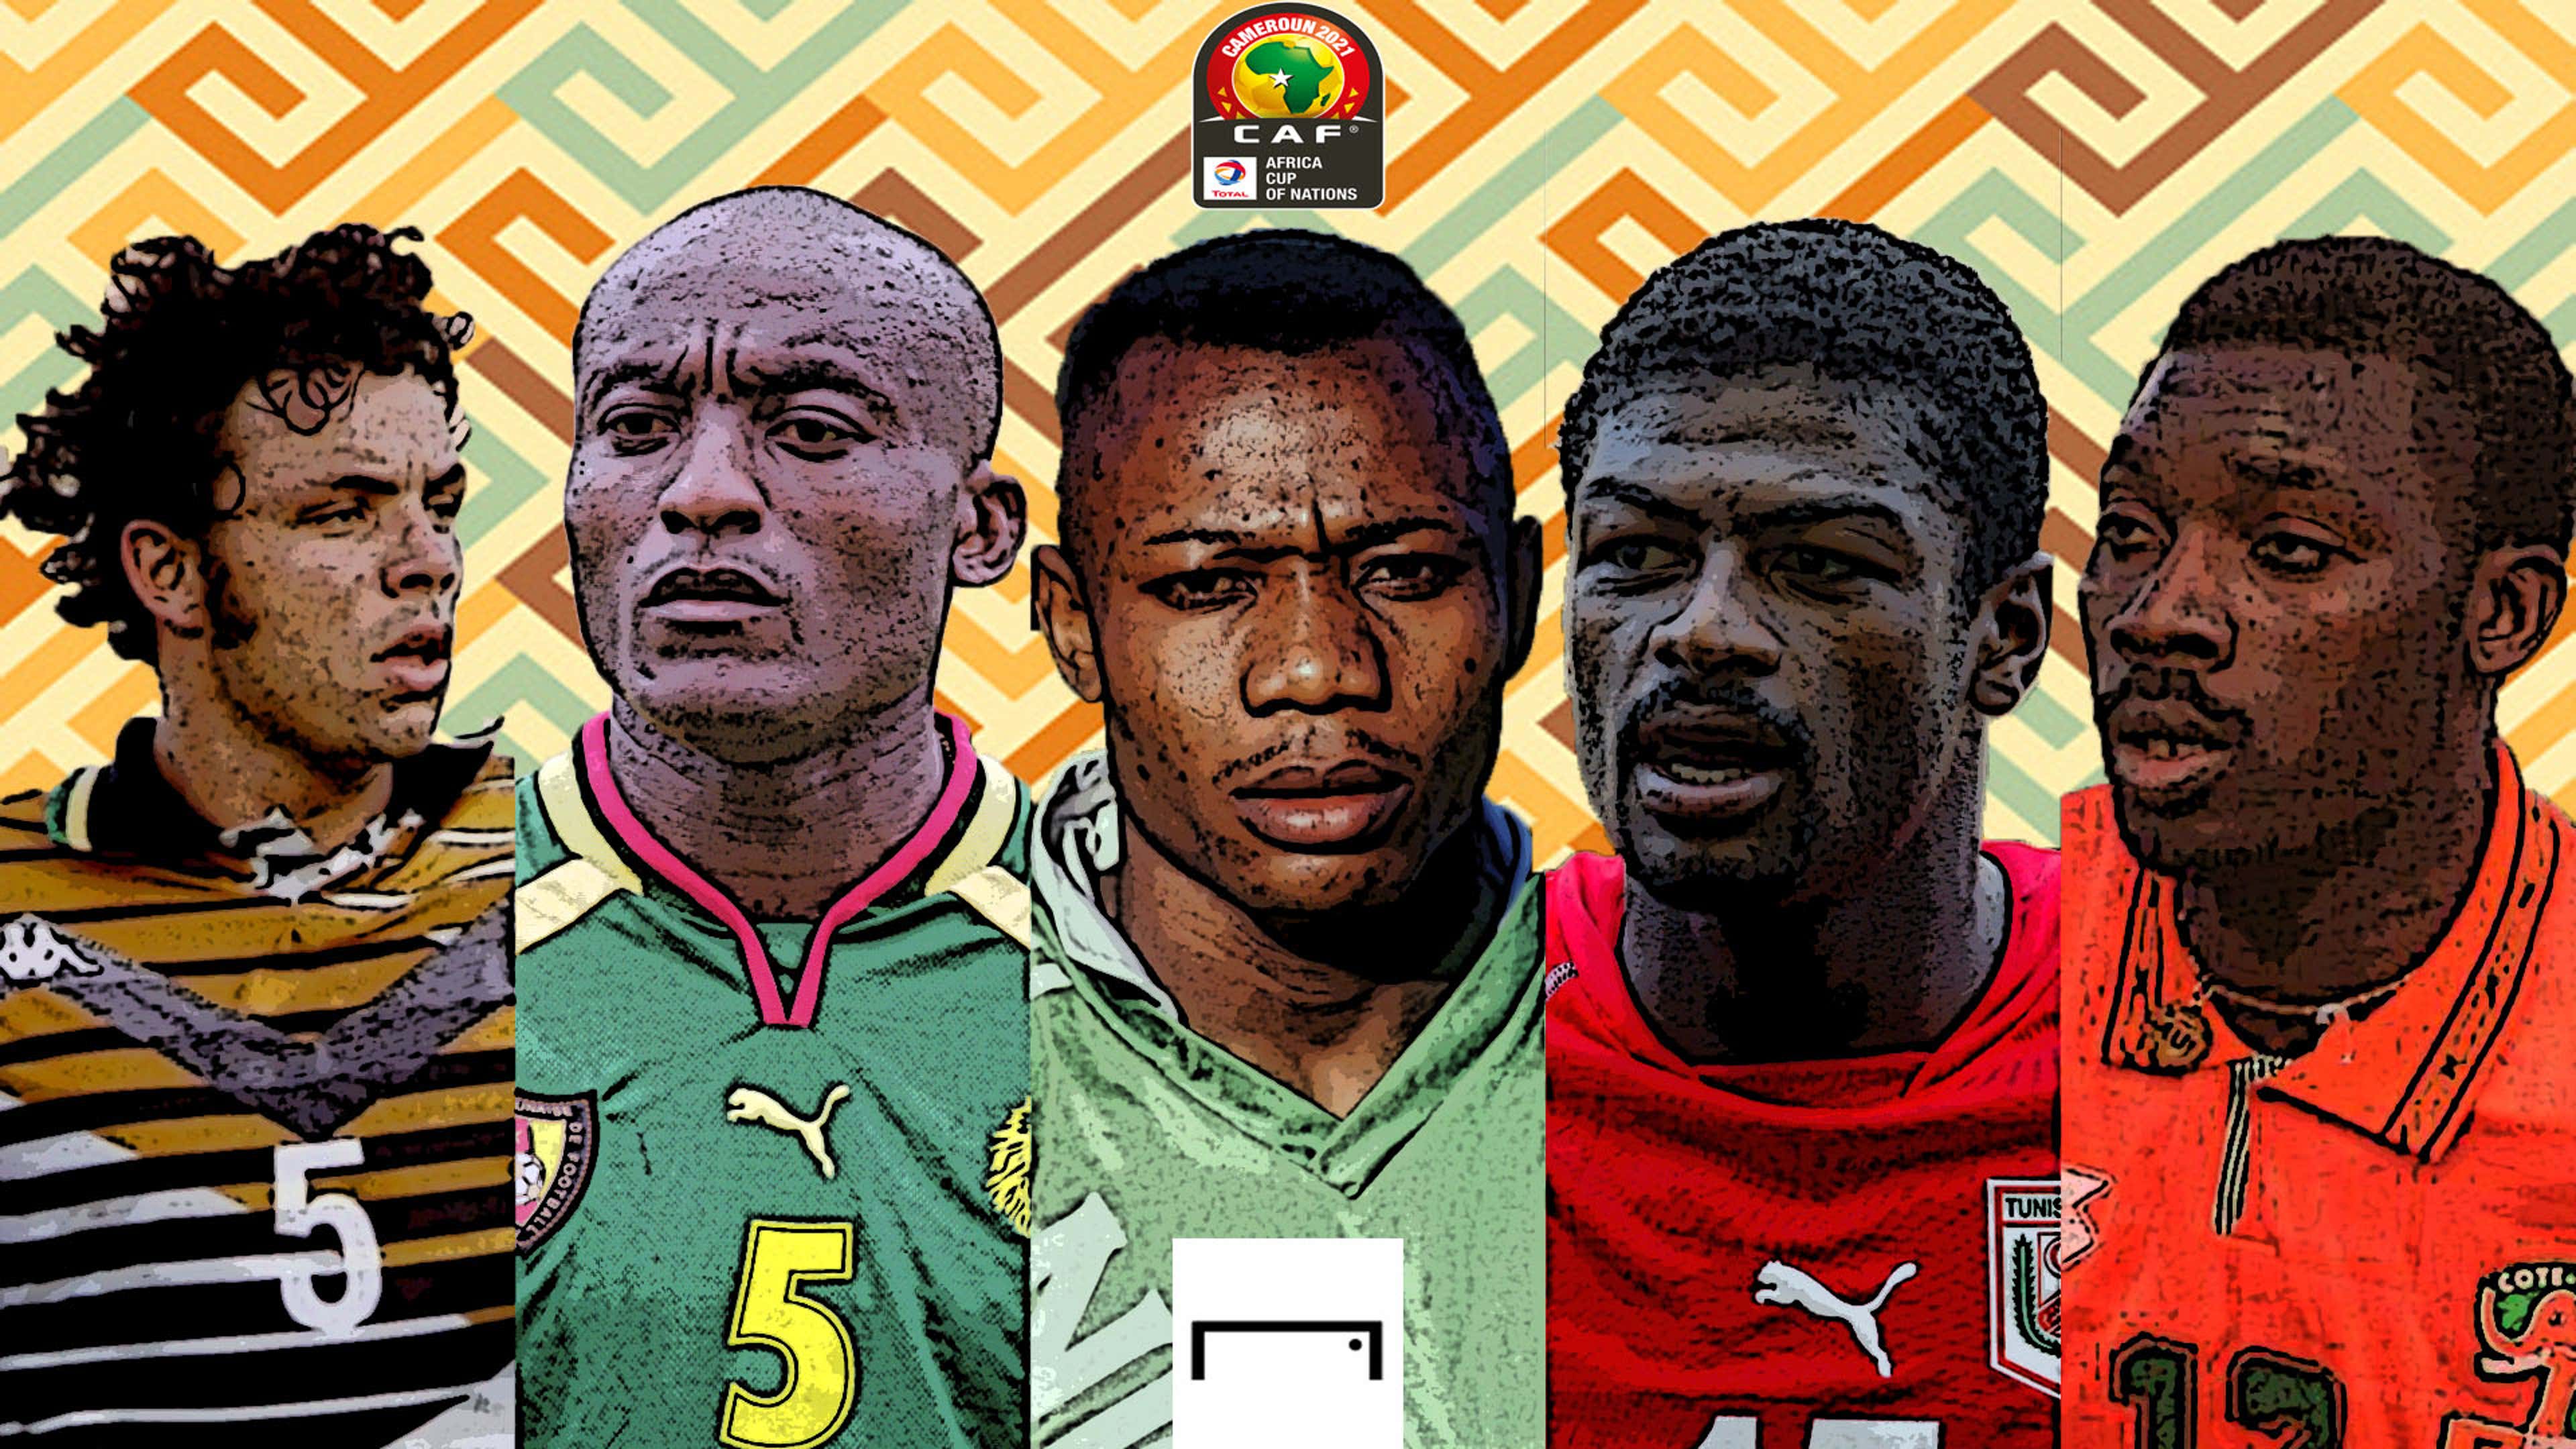 AFCON winners